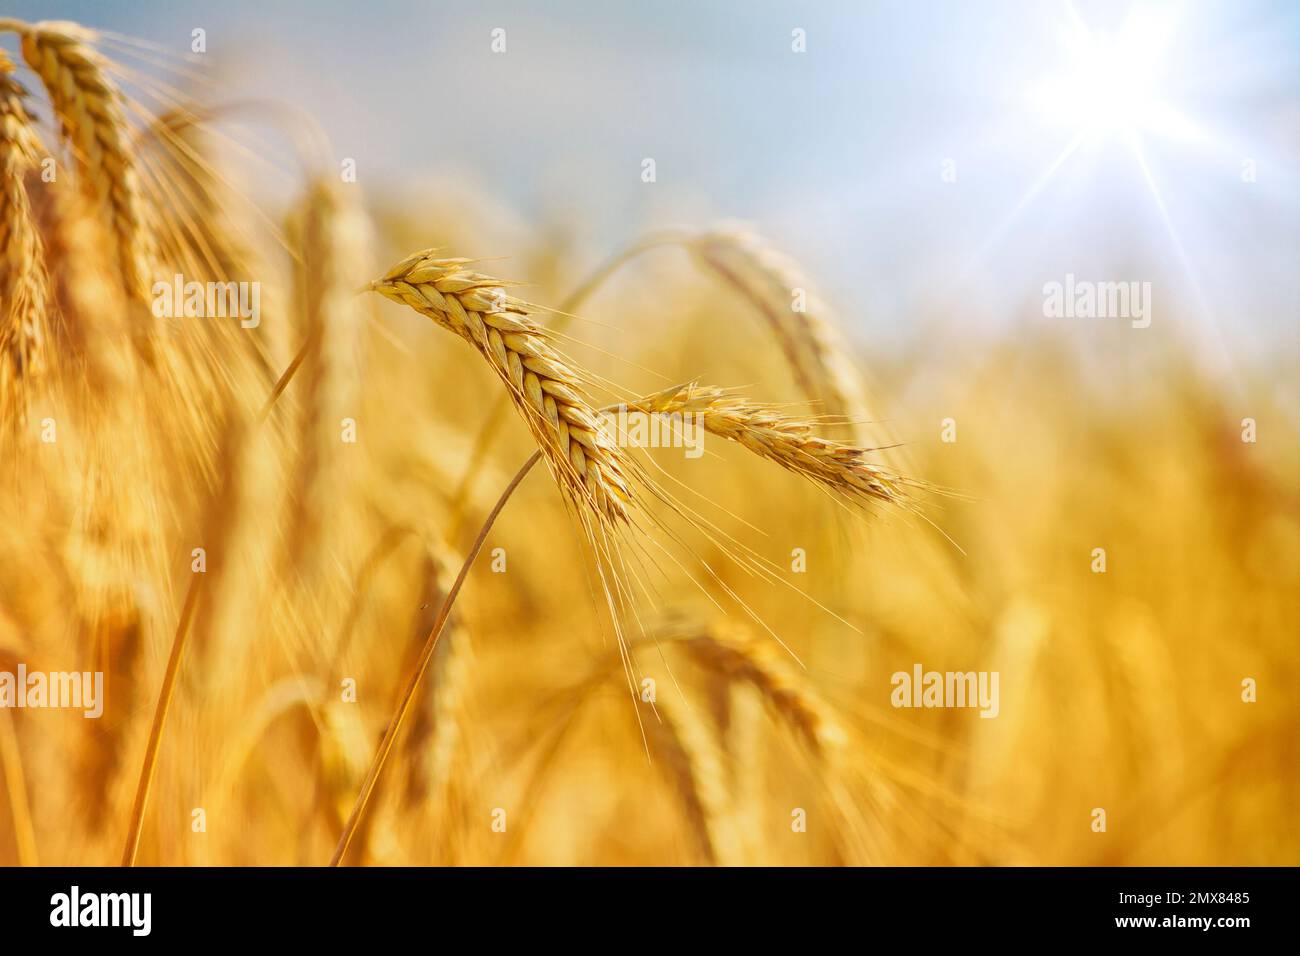 Rural landscape - field common wheat (Triticum aestivum) in the rays of the summer sun, close-up Stock Photo